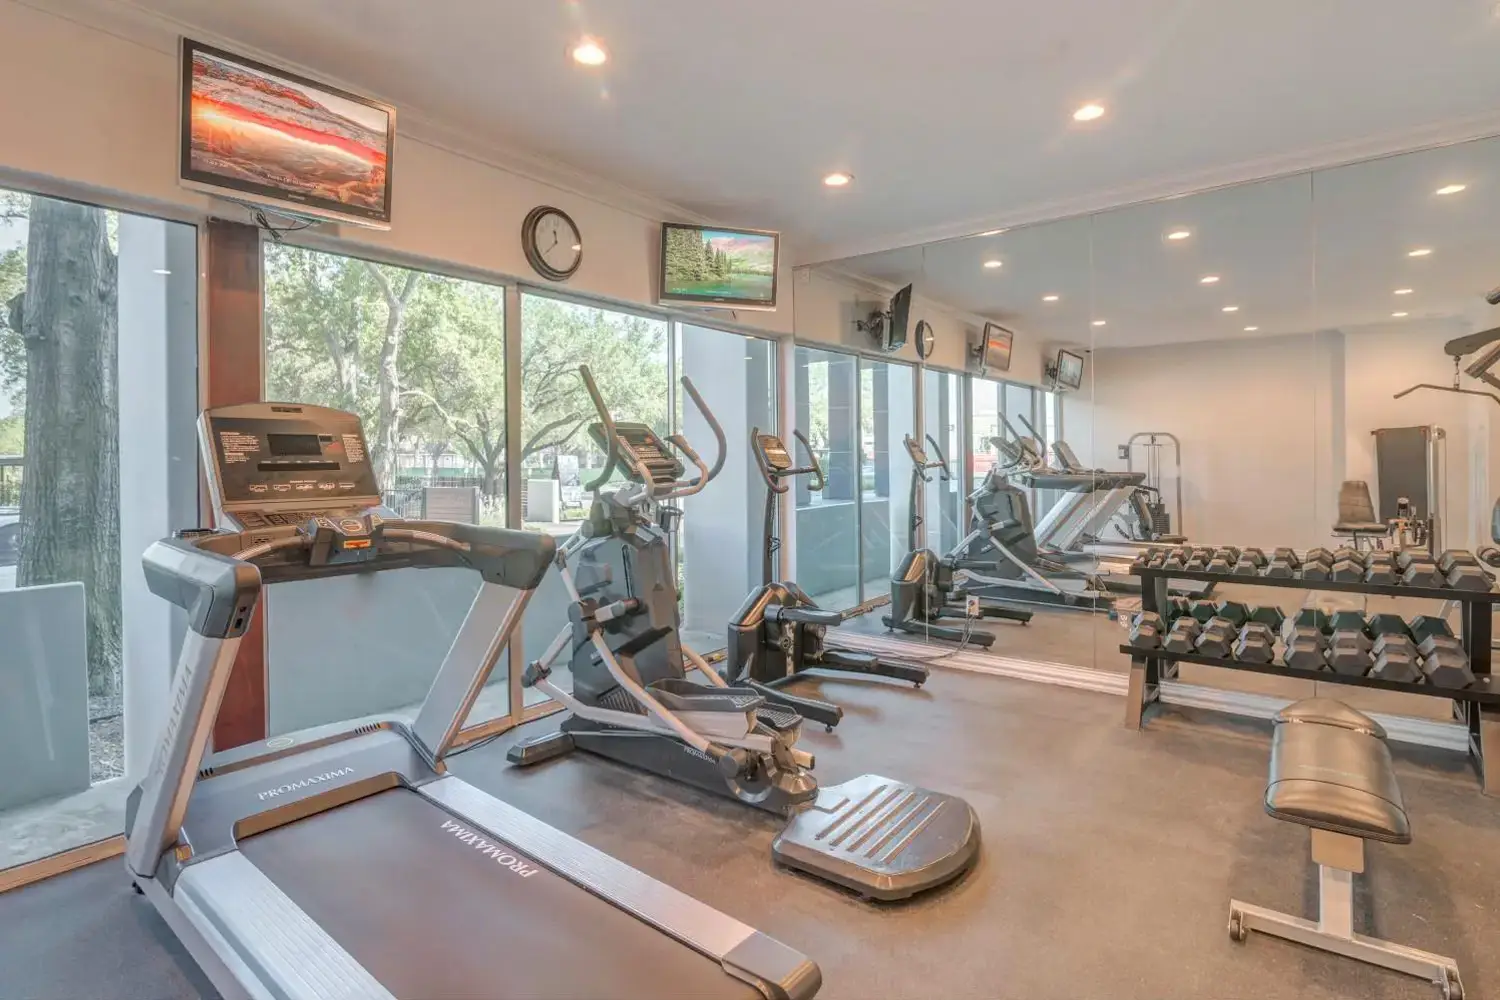 Gym with various exercise equipment including treadmills, ellipticals, stationary bike, weight rack, and a blue exercise ball.